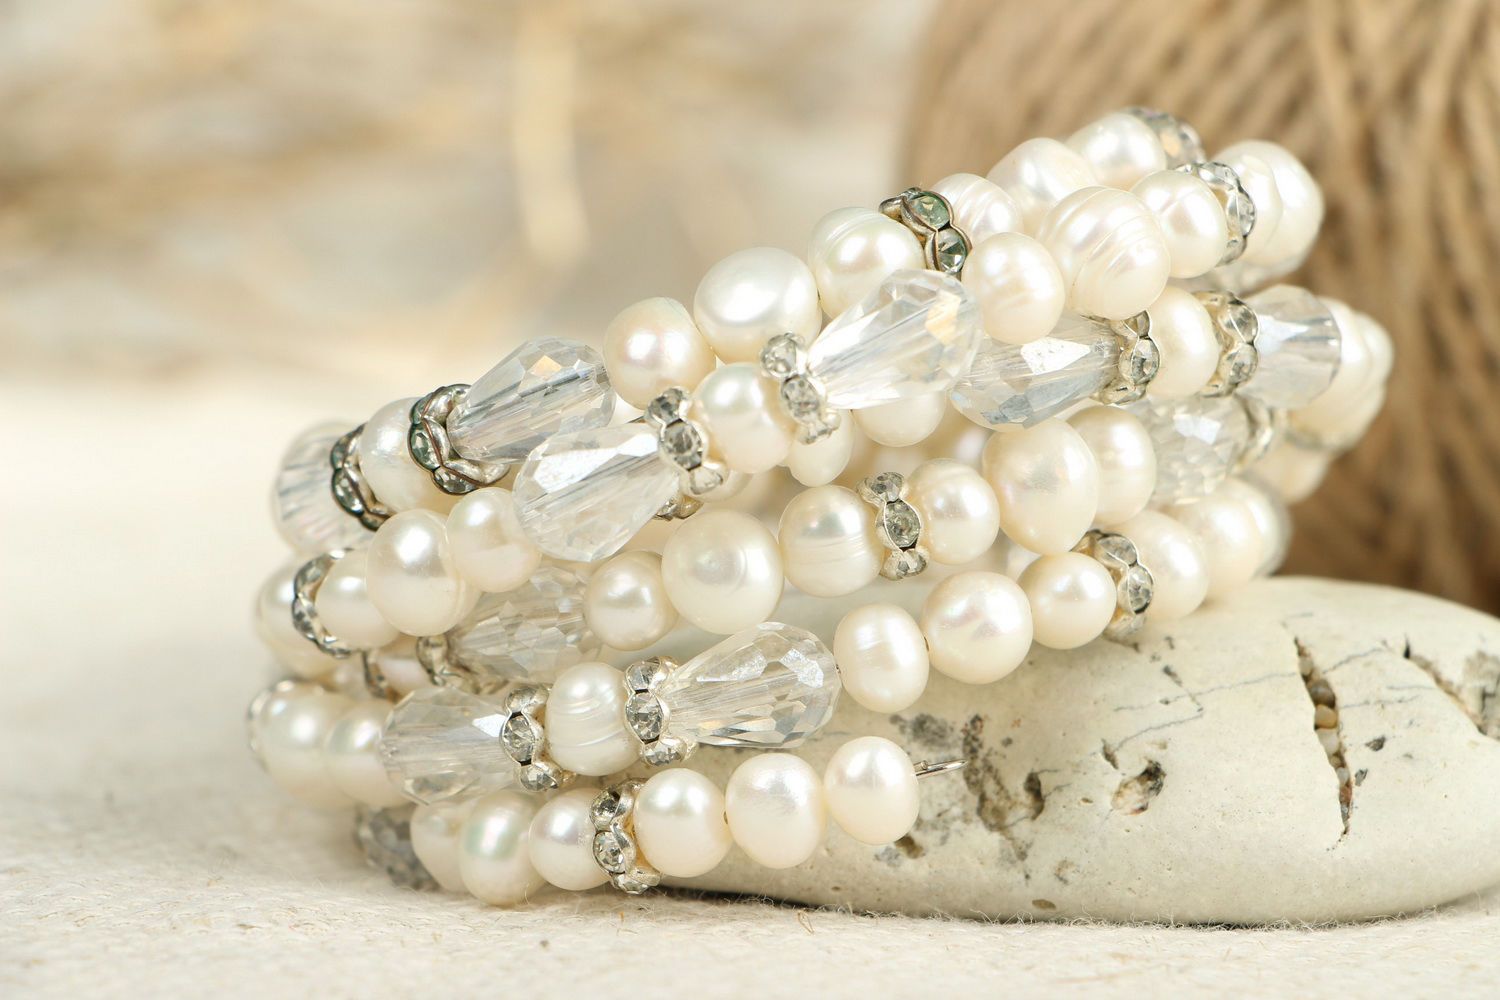 Handmade bracelet made of pearls and Czech crystal photo 1